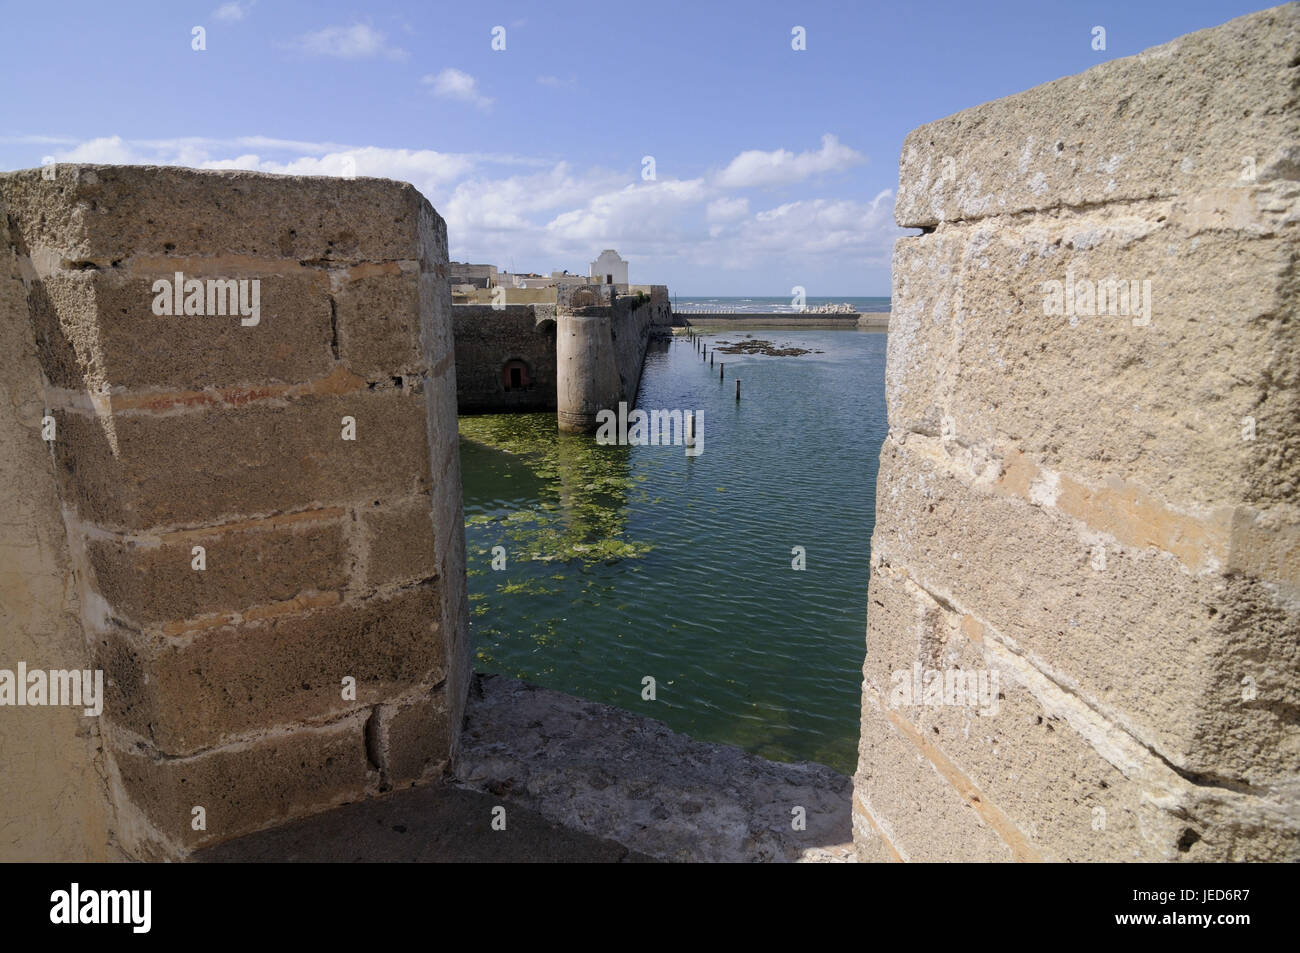 Fortress, old, in Portuguese, el Jadida, UNESCO-world cultural asset, Morocco, Africa, Stock Photo